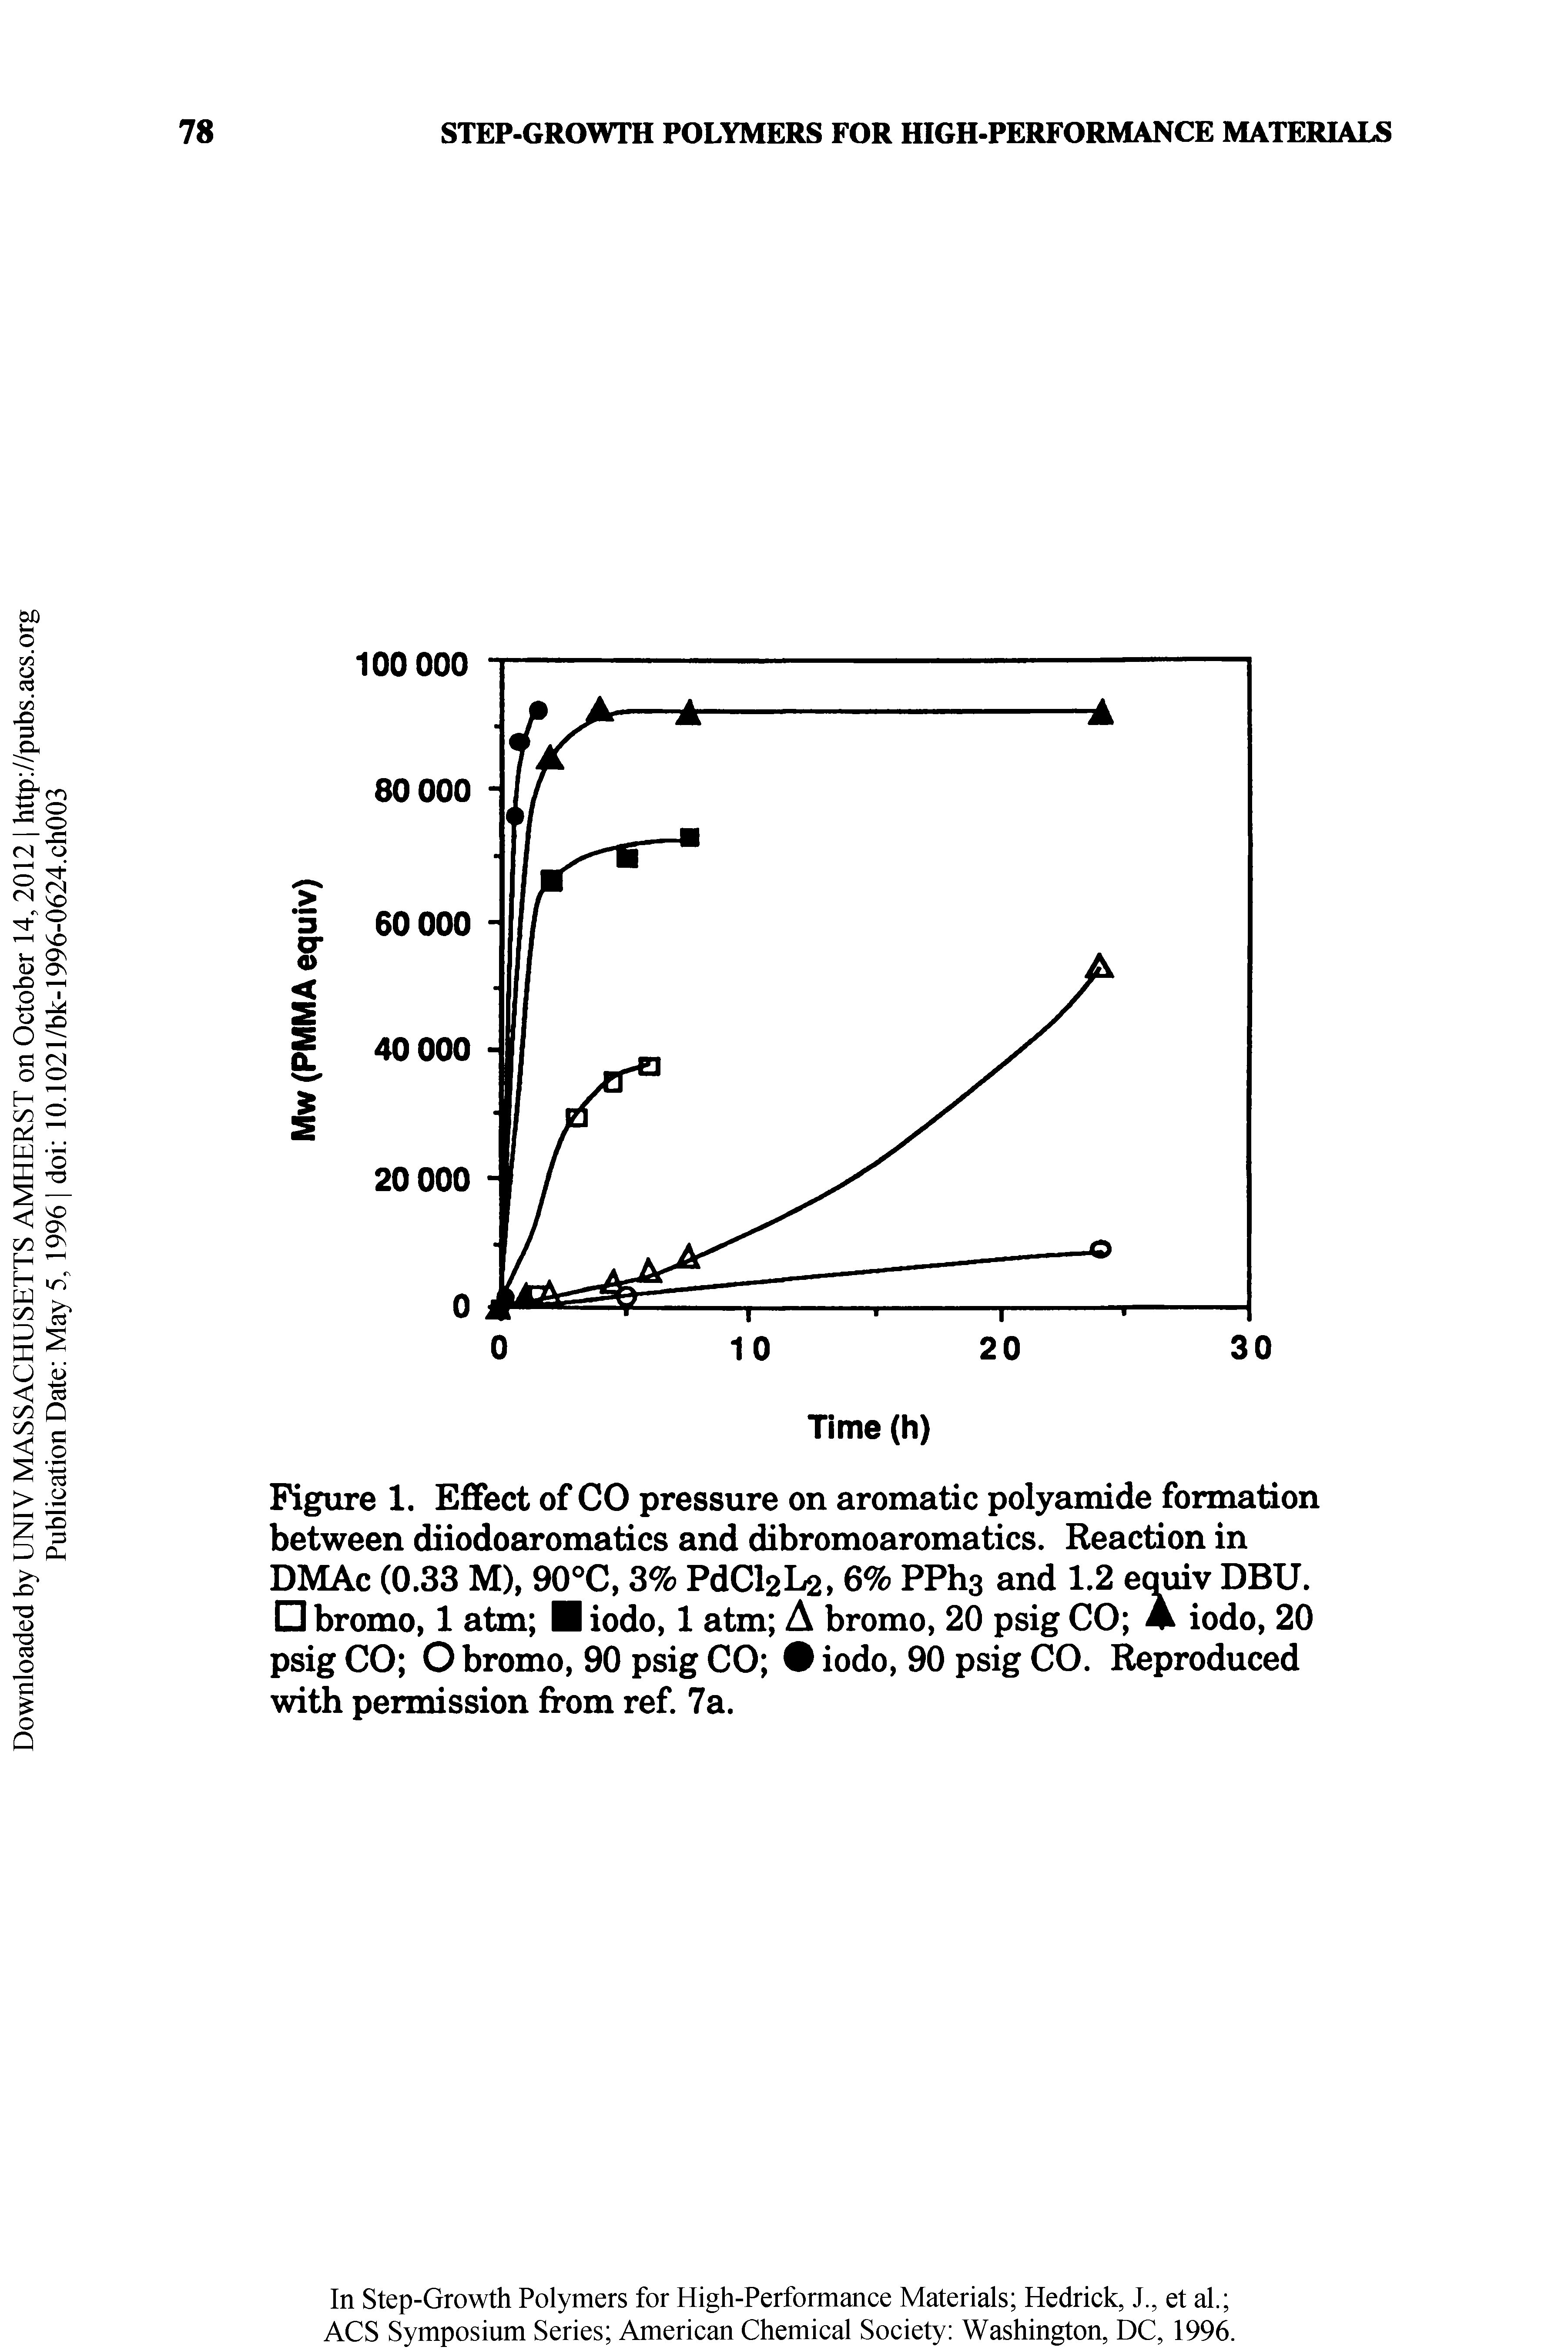 Figure 1. Effect of CO pressure on aromatic polyamide formation between diiodoaromatics and dibromoaromatics. Reaction in DMAc (0.33 M), 90°C, 3% PdCl2L2, 6% PPhs and 1.2 equiv DBU. bromo, 1 atm iodo, 1 atm A bromo, 20 psig CO A iodo, 20 psig CO O bromo, 90 psig CO iodo, 90 psig CO. produced with permission from ref 7a.